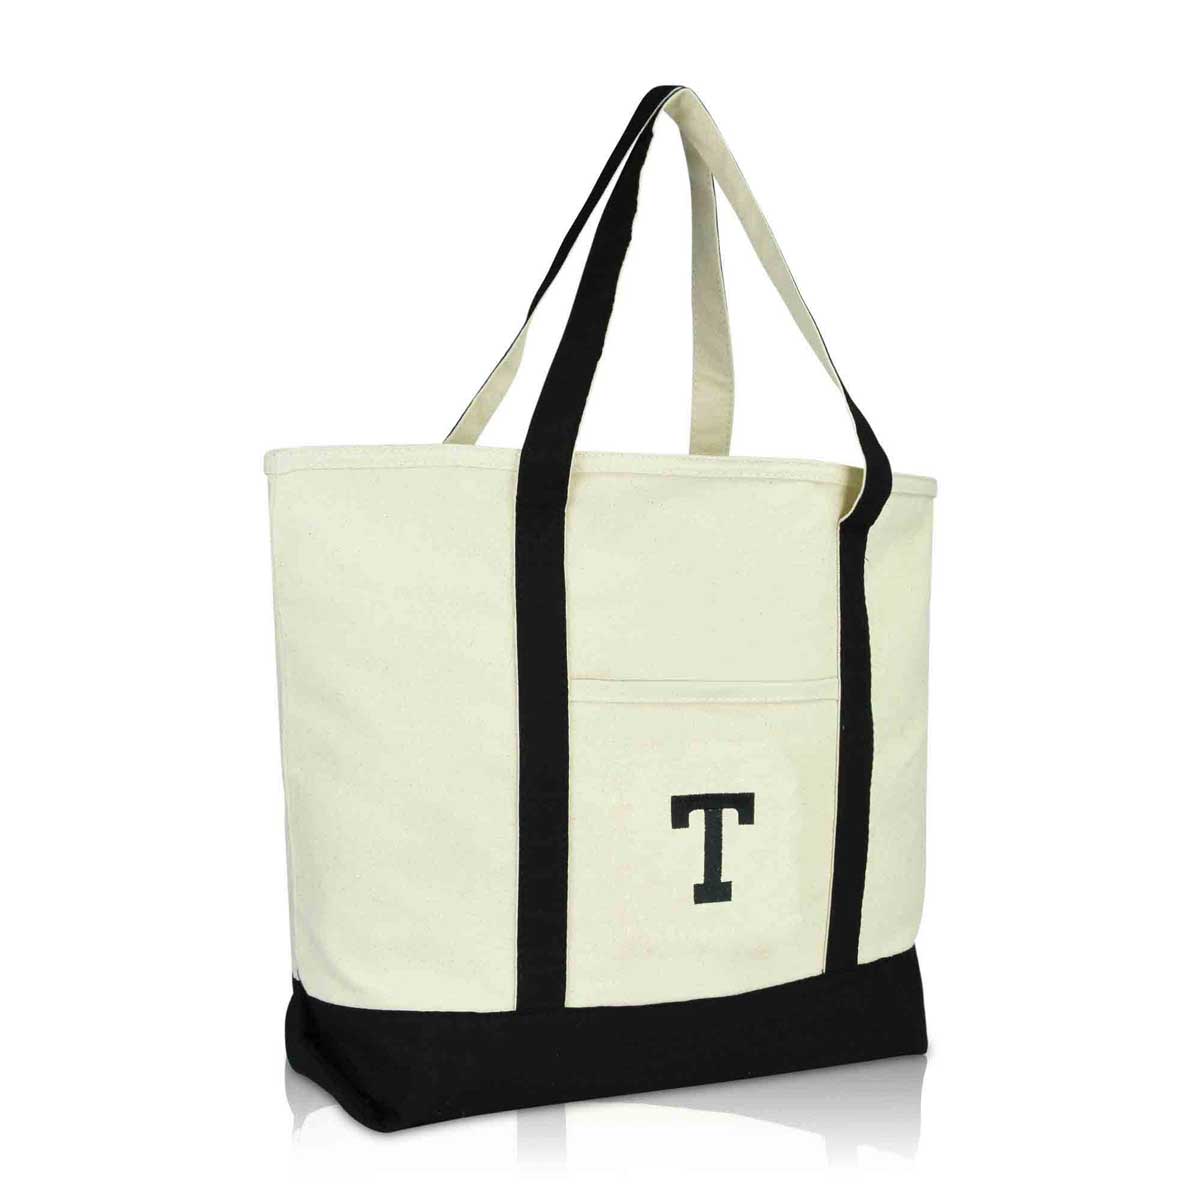 Embroidered Monogram Tote Bags